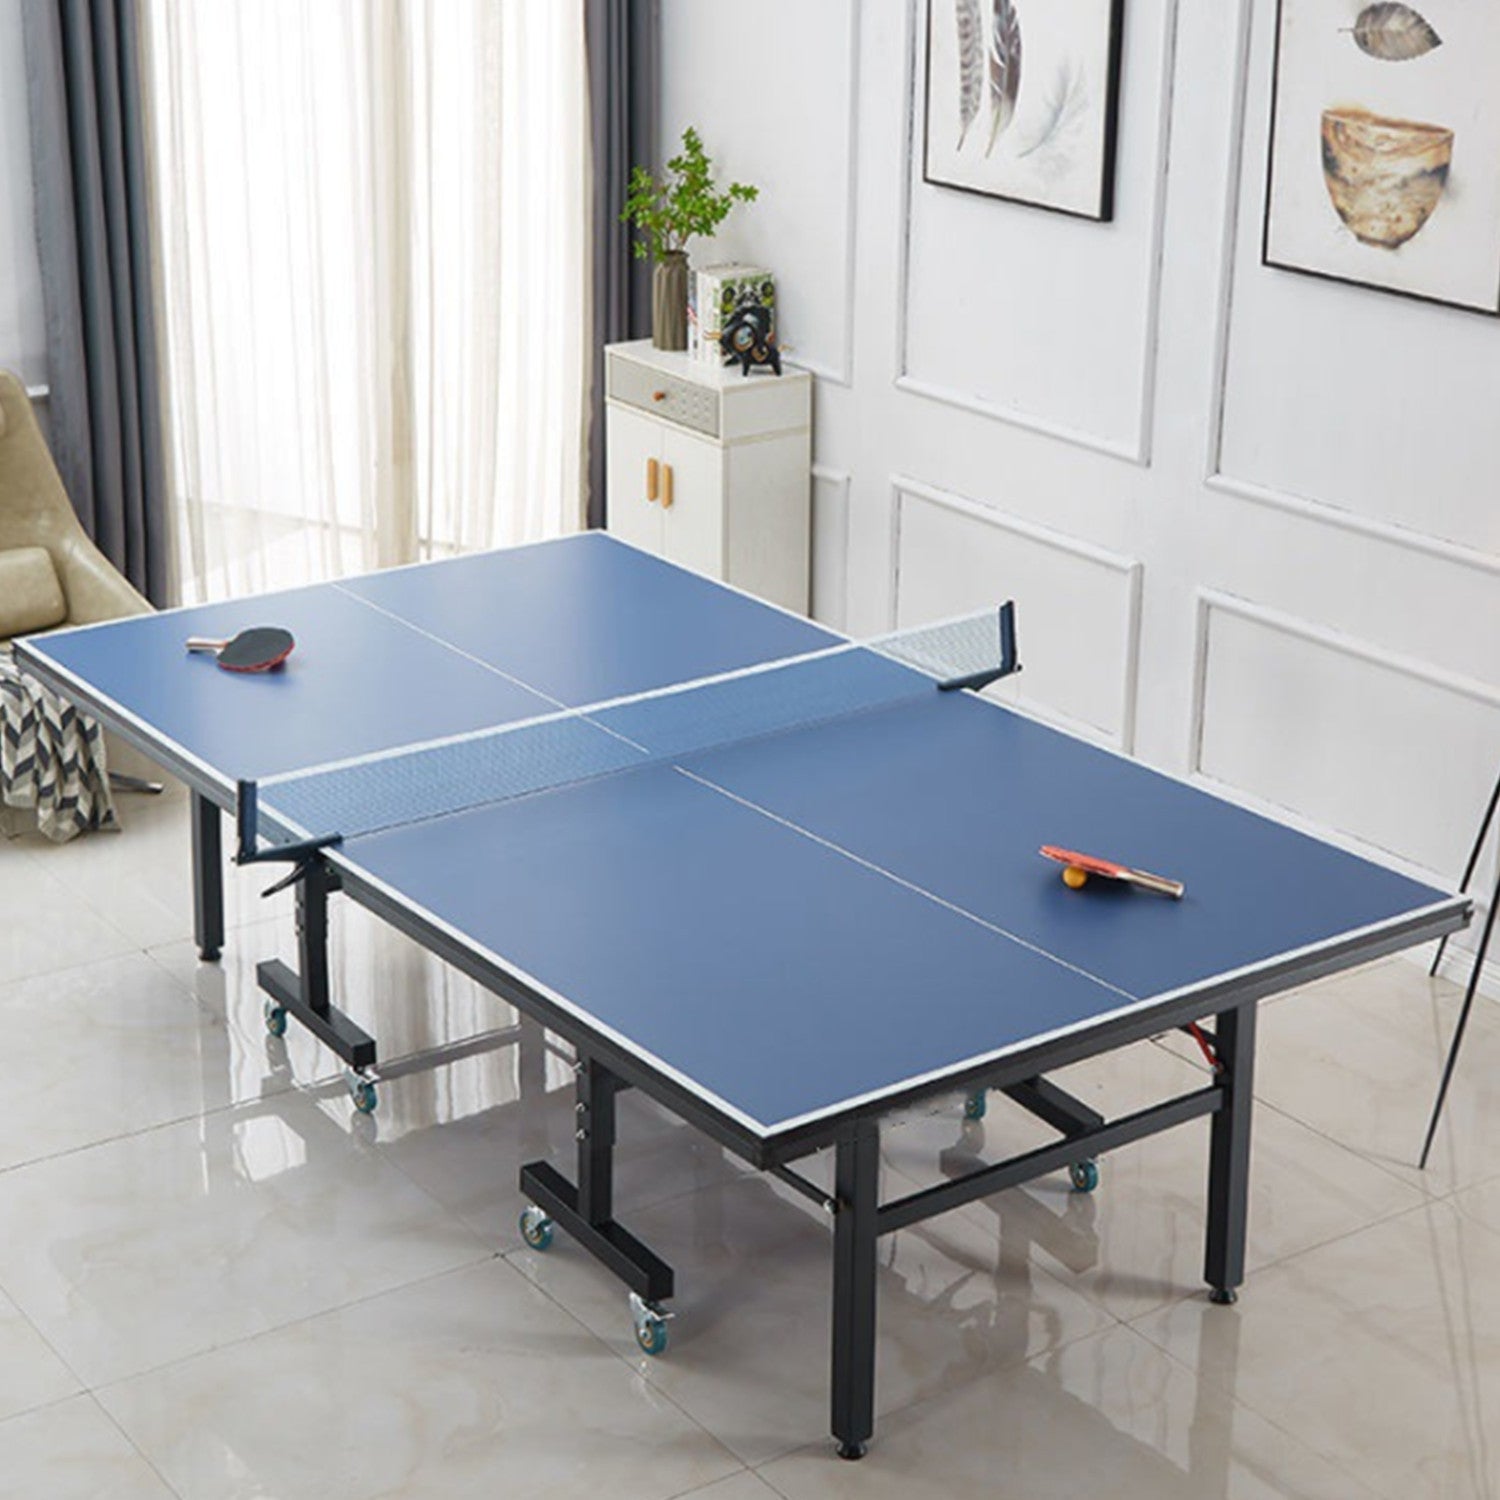 UXUAN SPORTS Indoor Elite Series 16mm Table Tennis Table|10-Minute Assembly